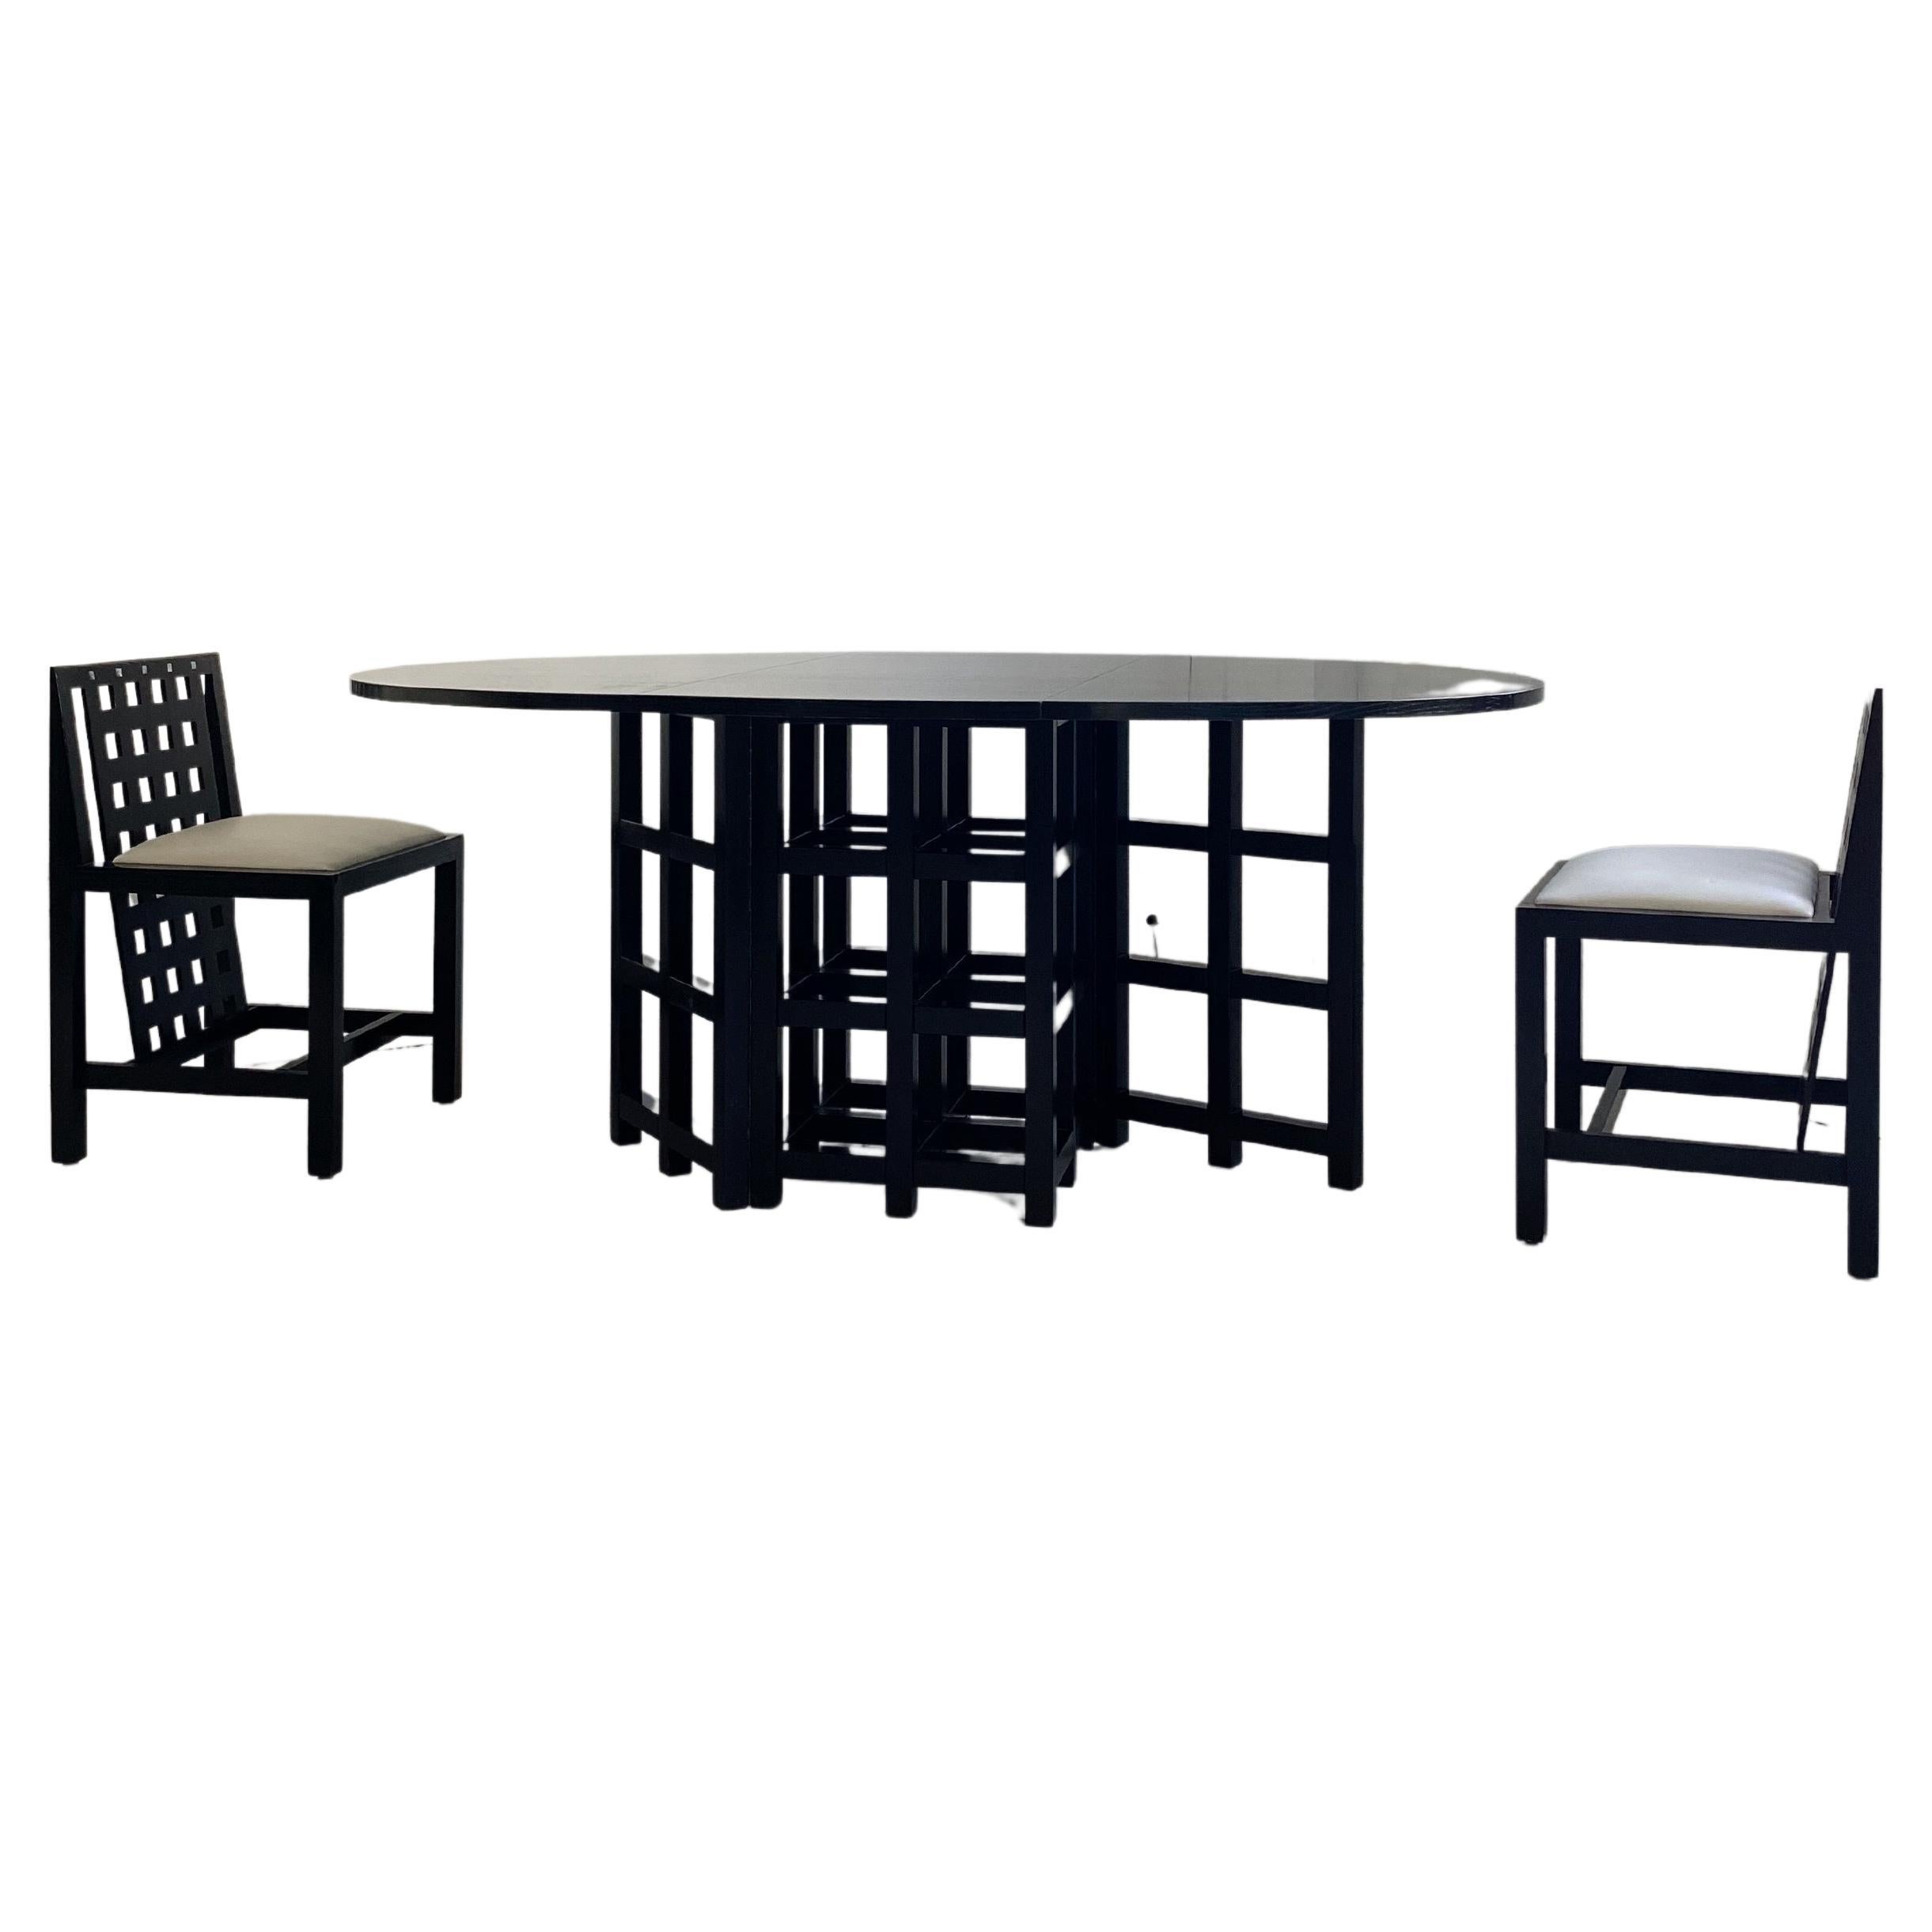 DS1 Table & 4 DS3 Chairs Dining Set by Charles Rennie Mackintosh for Cassina